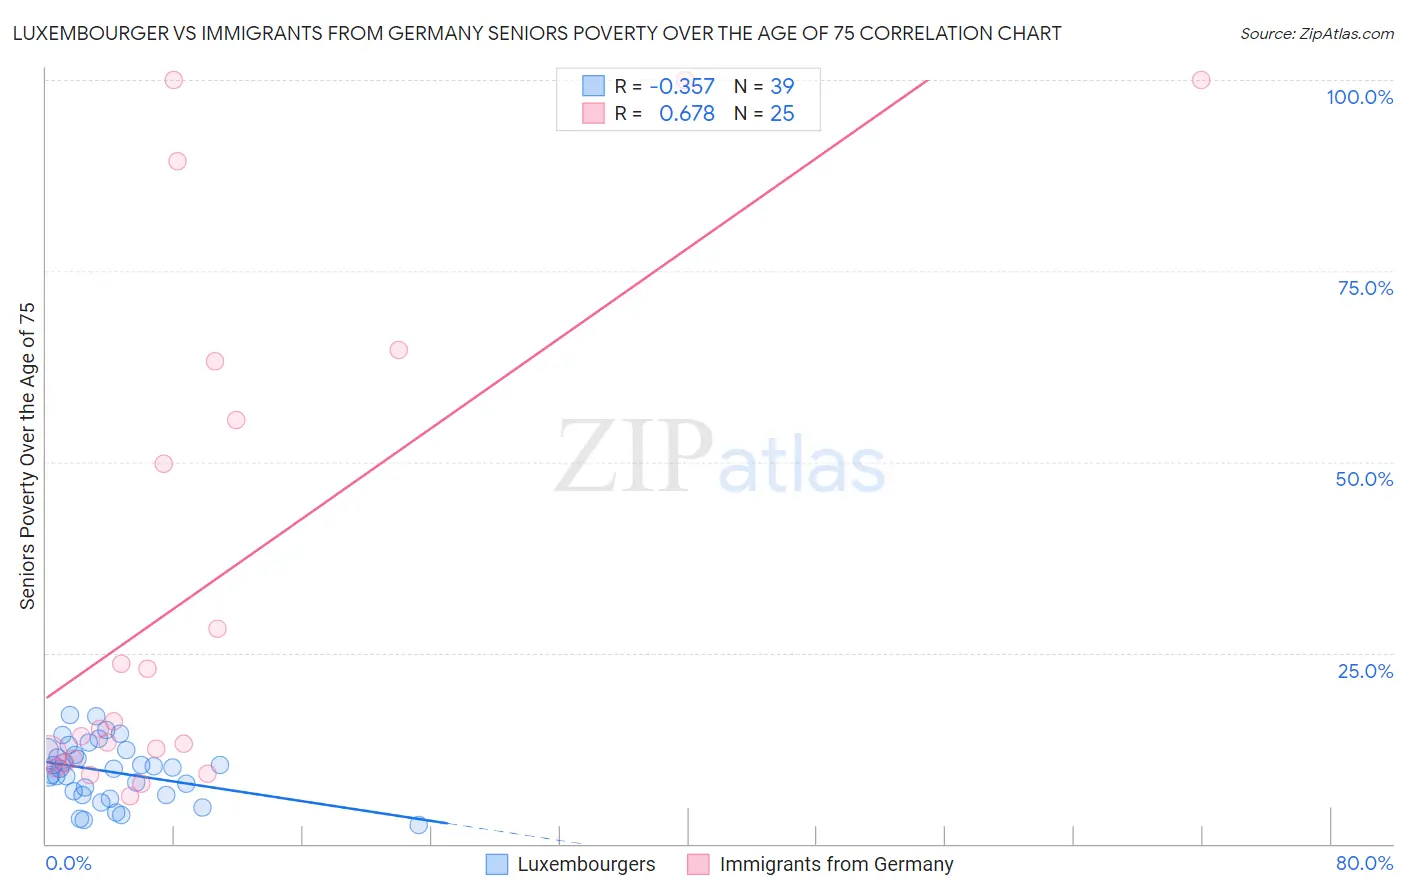 Luxembourger vs Immigrants from Germany Seniors Poverty Over the Age of 75